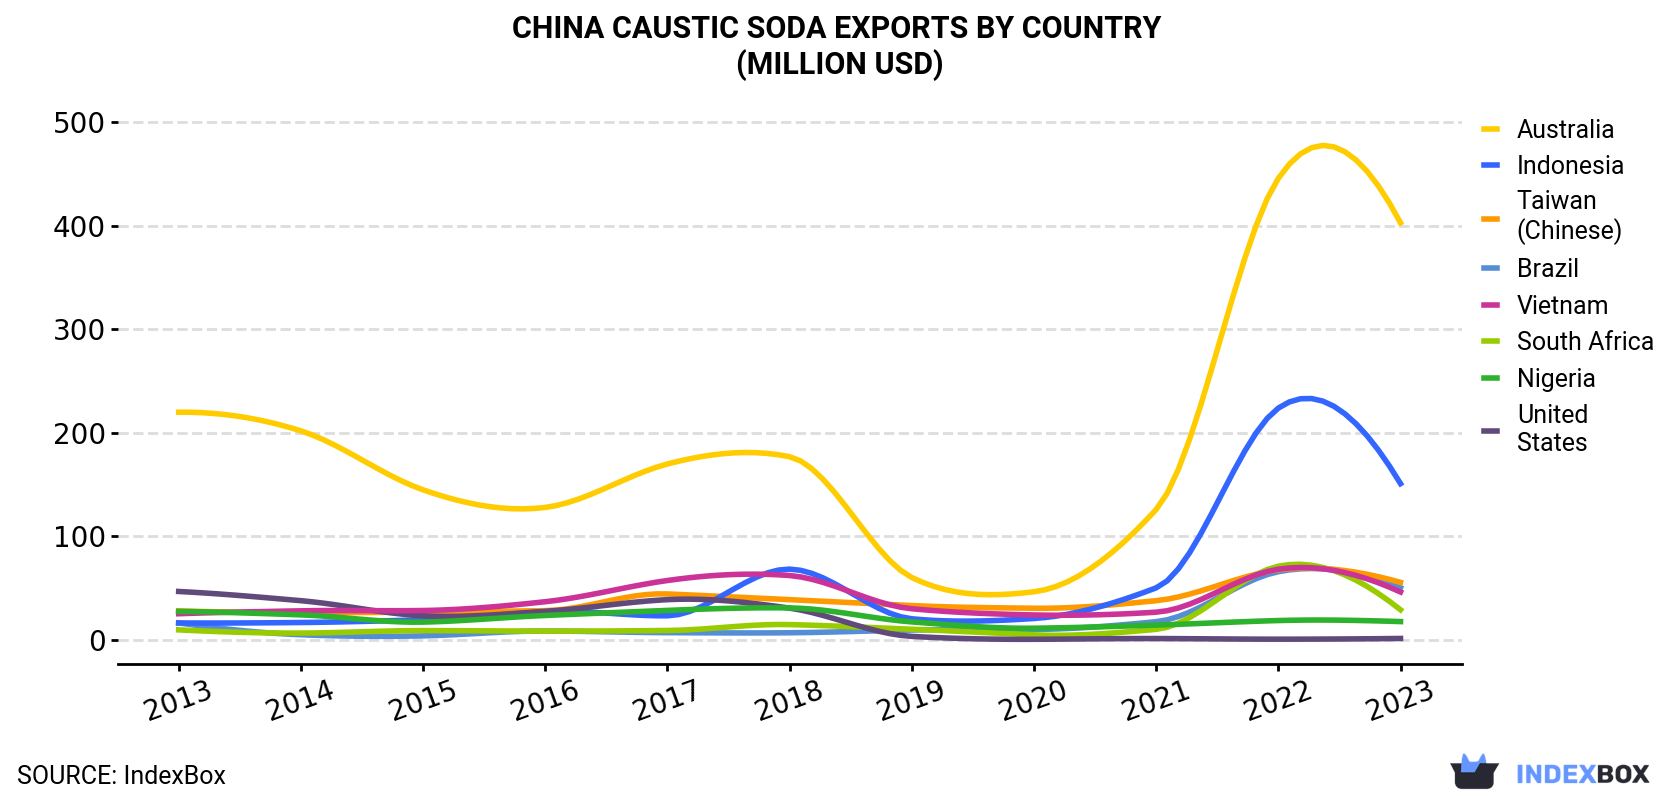 China Caustic Soda Exports By Country (Million USD)